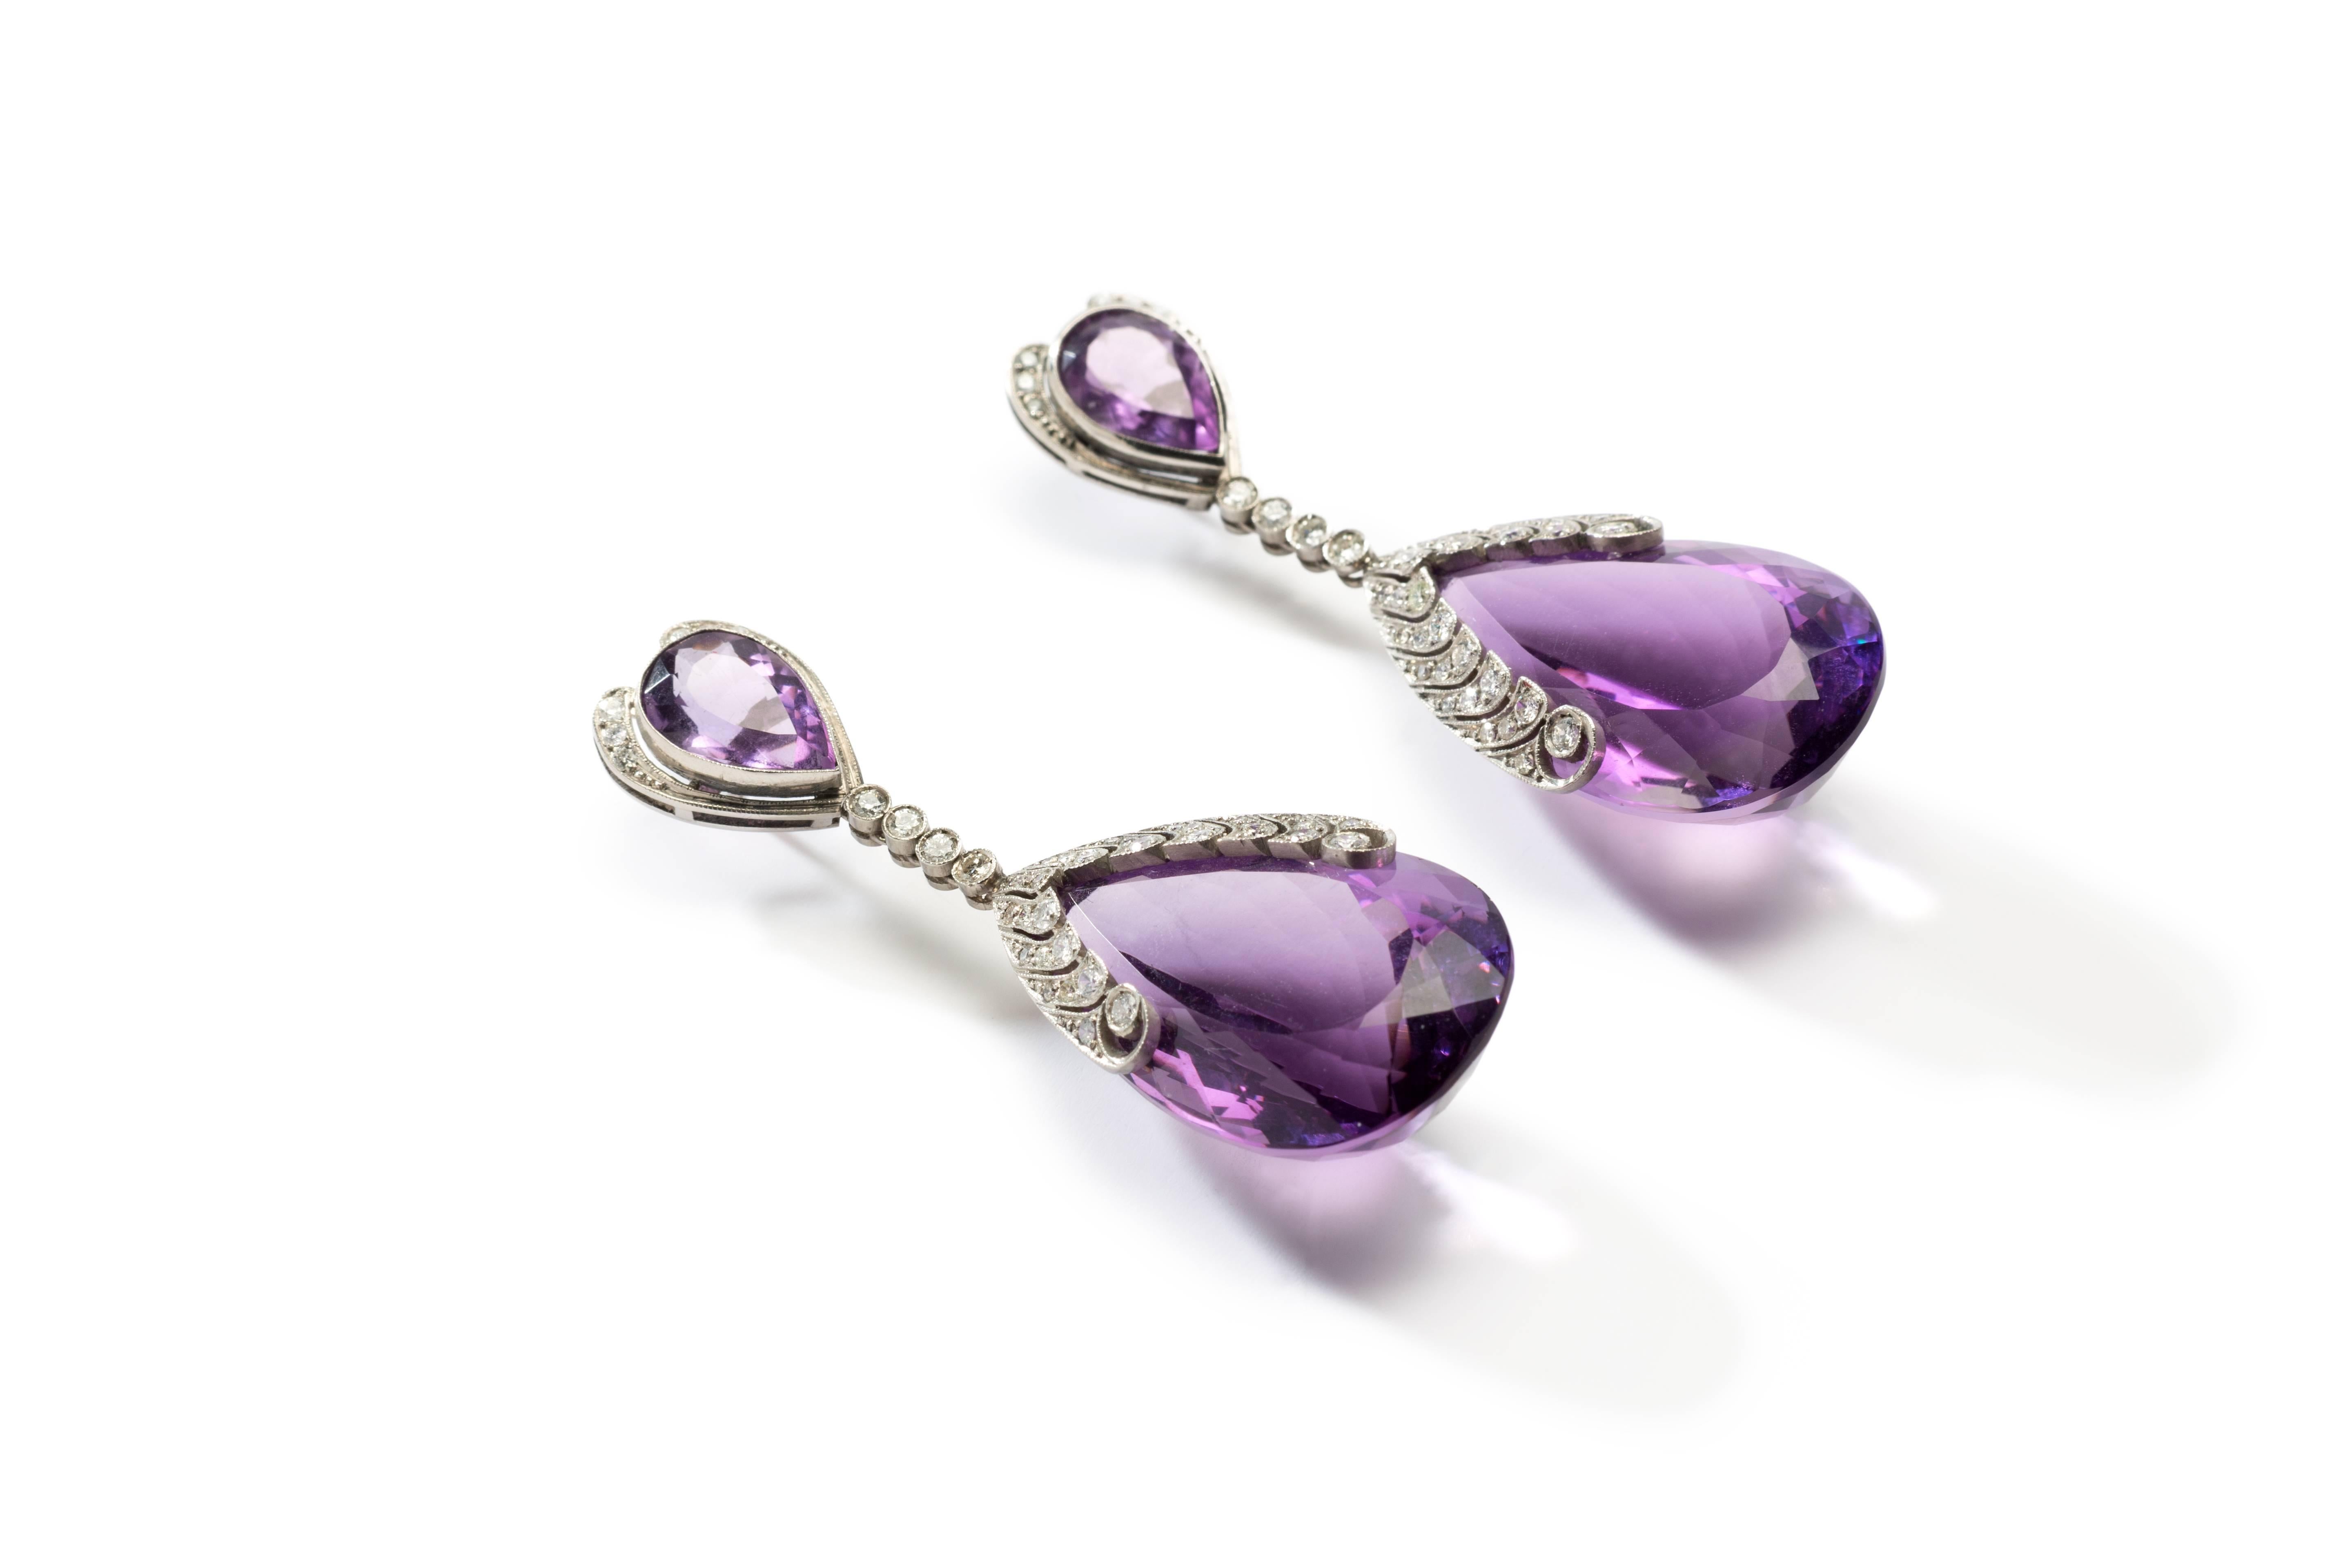 Argentina, 1920's-1930's. Set with 2 pear-shaped amethysts and 2 amethyst drops with an overall weight of ca. 90 carats. Adorned by 82 brilliant-cut diamonds totaling ca. 1,70 ct. Mounted in platinum. Total weight: 26,5 g. 
Length: 2.36 in ( 6 cm )